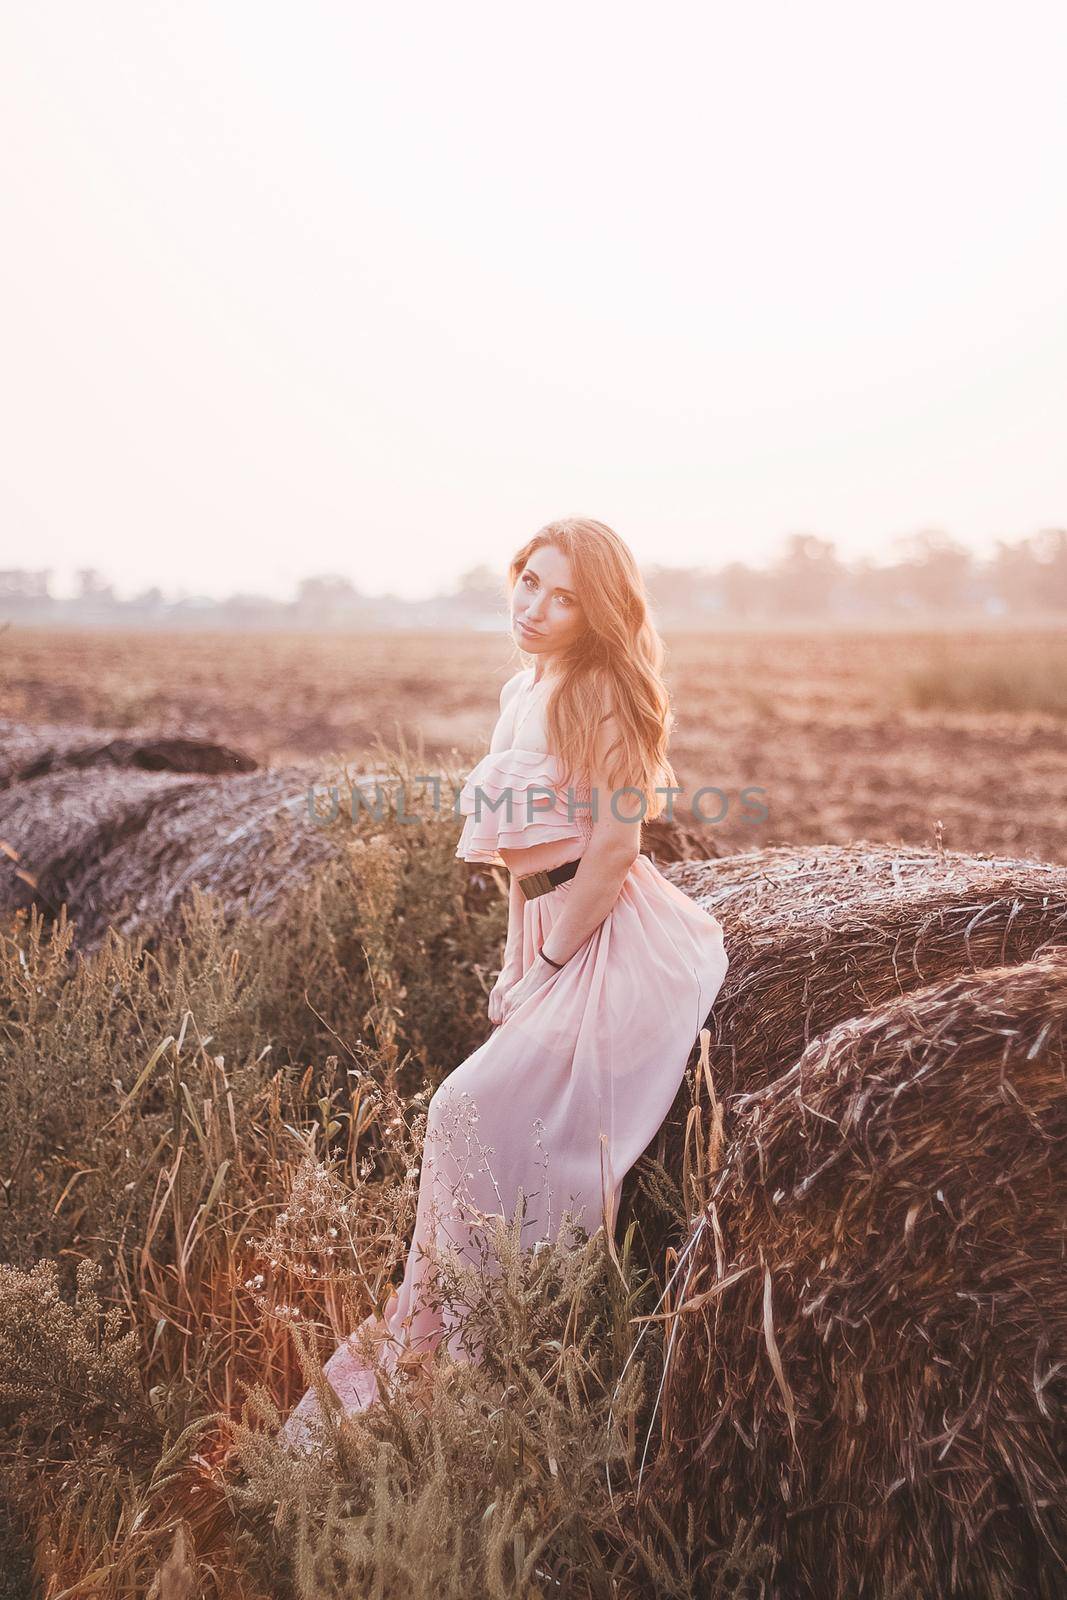 Beautiful romantic model girl outdoors dressed in tender long dress in the field in sunset light. Wind blowing long hair. Glow Sun, Sunshine. Backlit. Toned in warm colors.